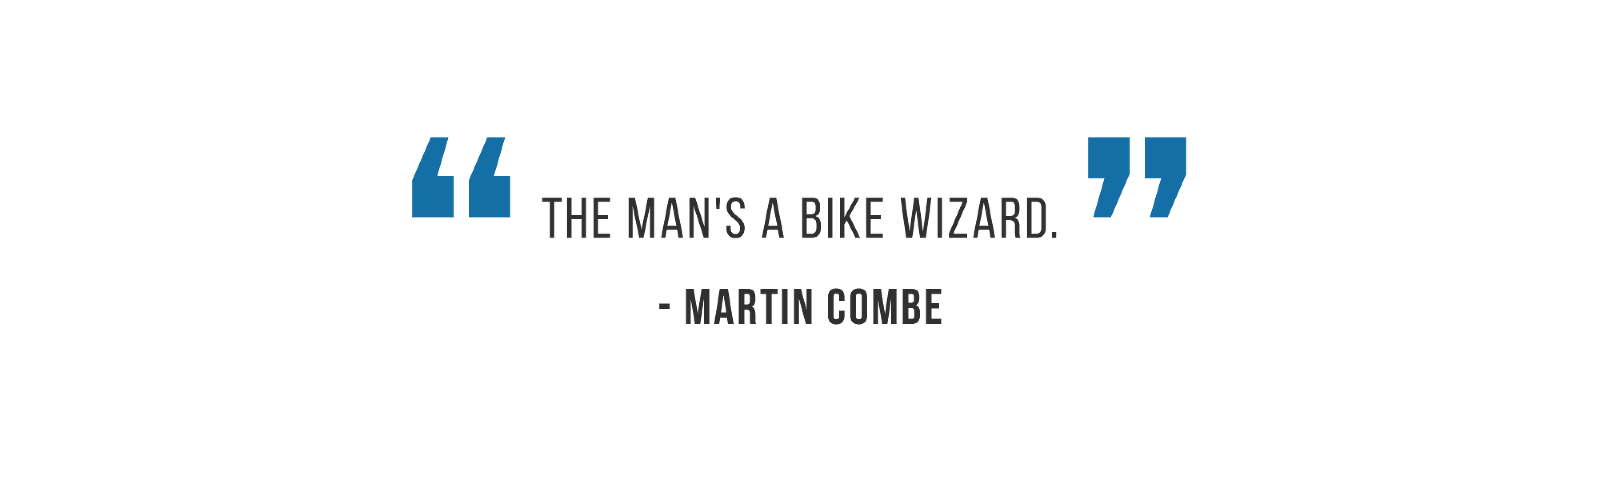 AM Bike Co Review Quotes-003